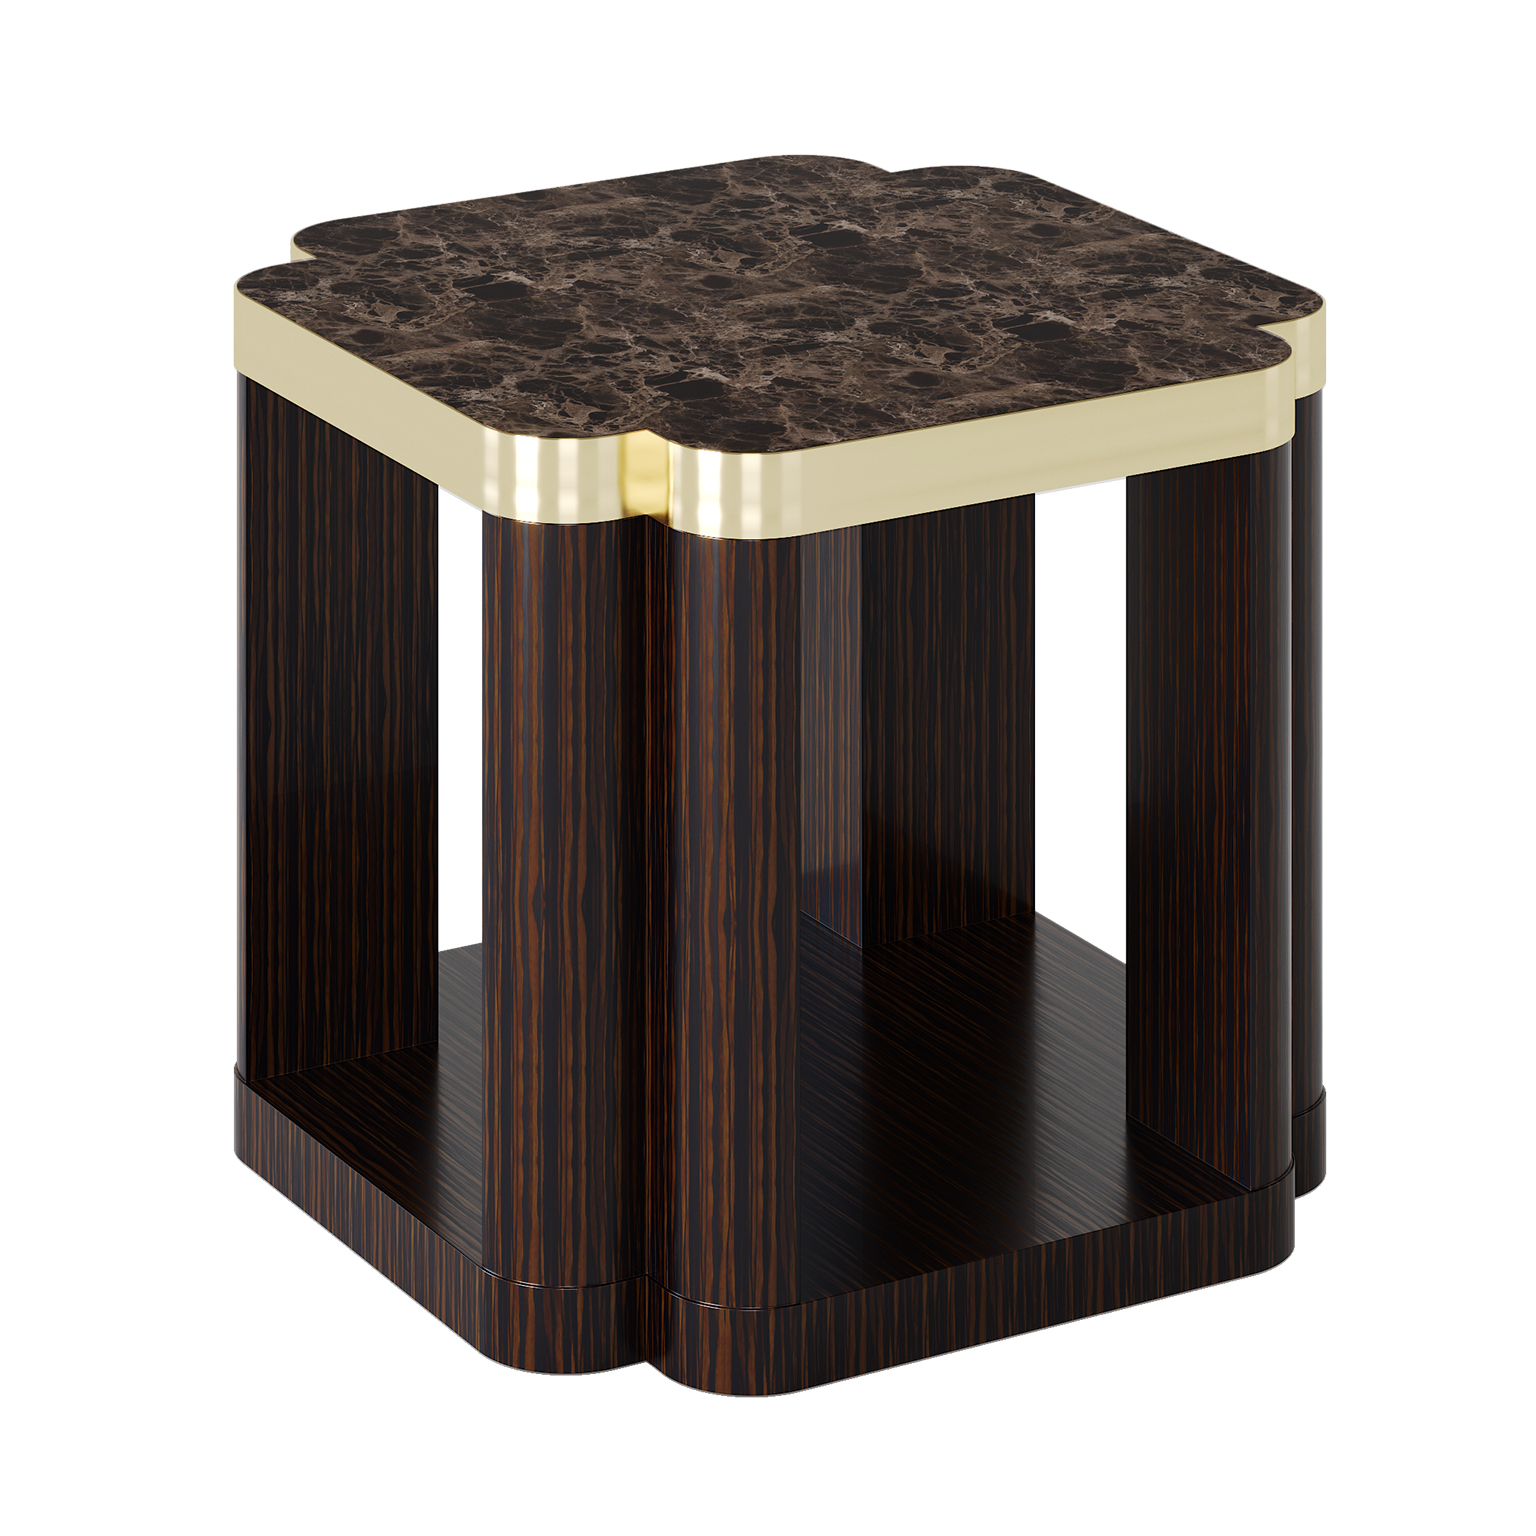 Ebony side table with marble top, wrapped in smoked brass